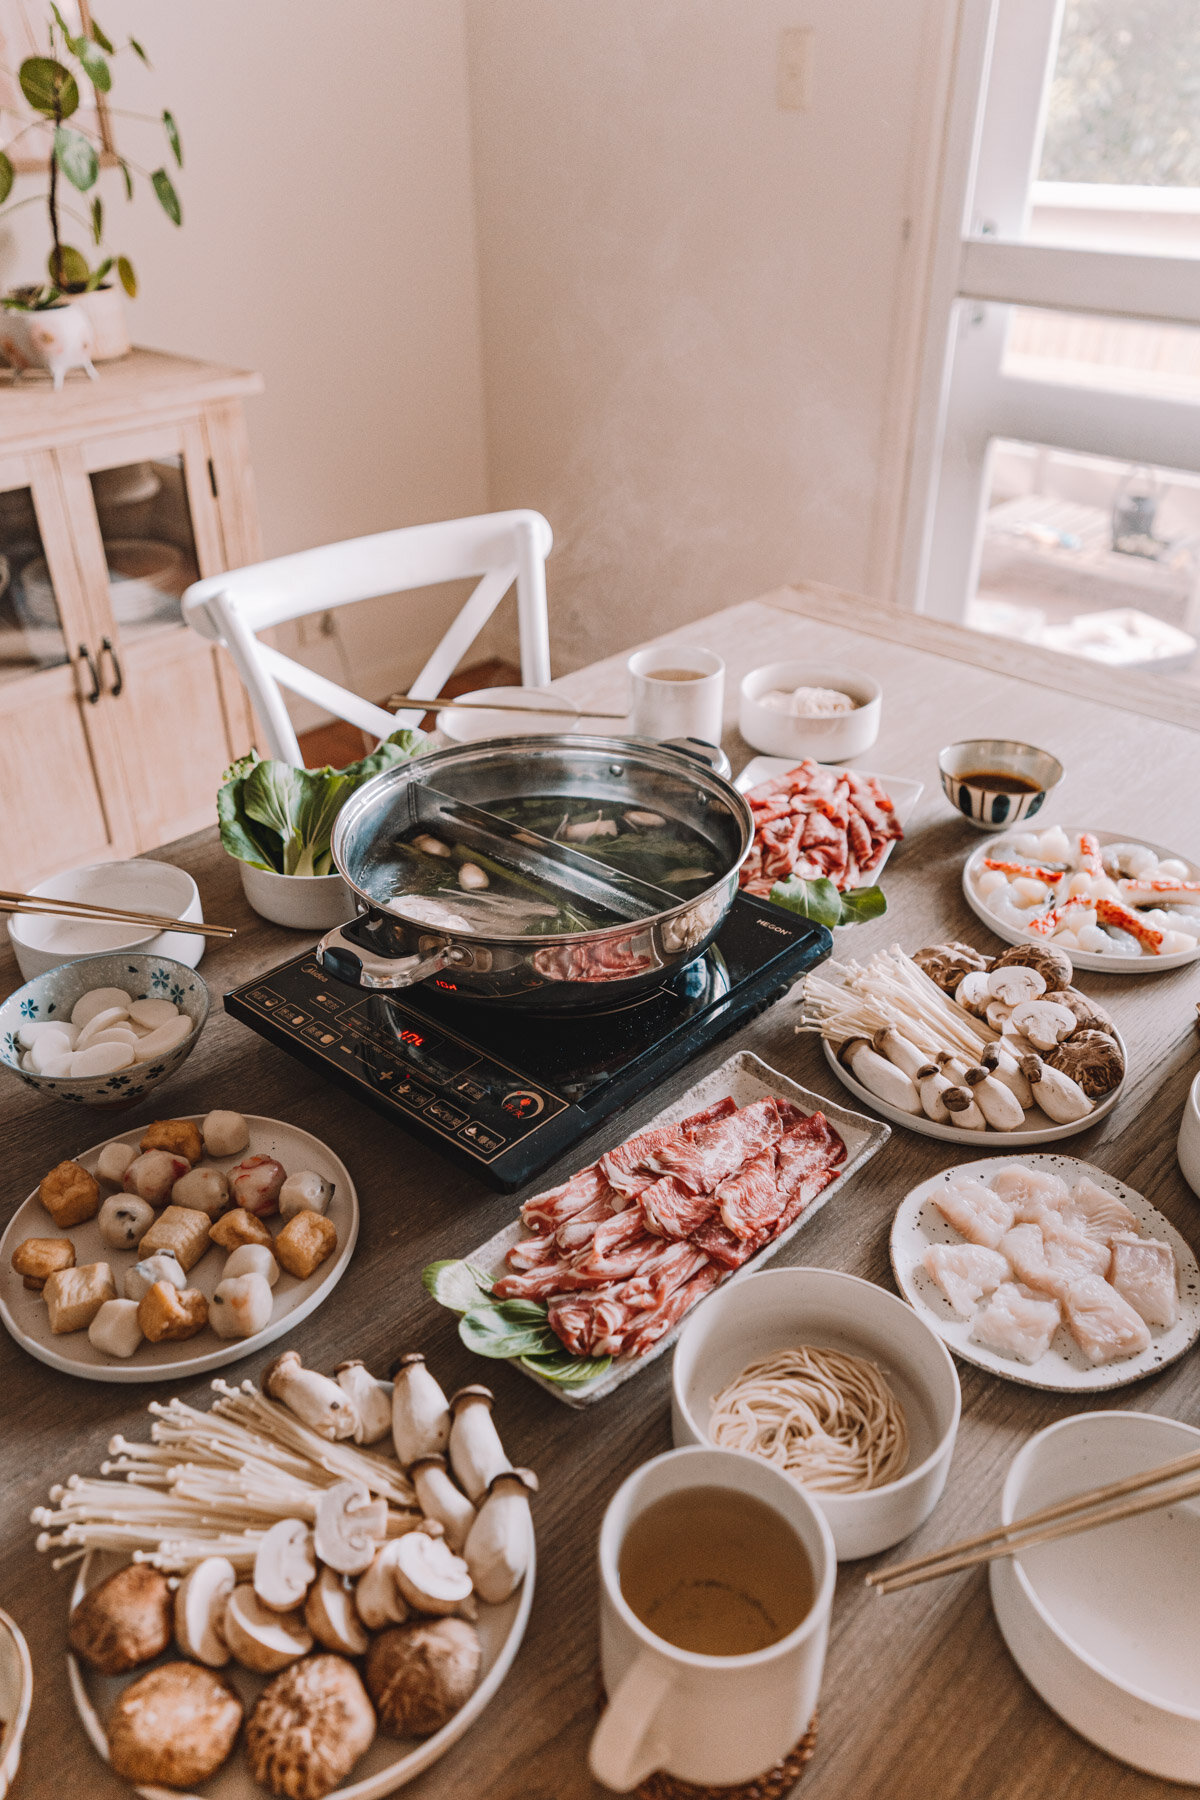 https://images.squarespace-cdn.com/content/v1/5e1077b0019b062397153b23/1592289914555-0DTKRVCPVD5DH7ZFMCGL/Chinese+Hot+Pot+Guide+How+to+Hot+Pot+at+Home-66.jpg